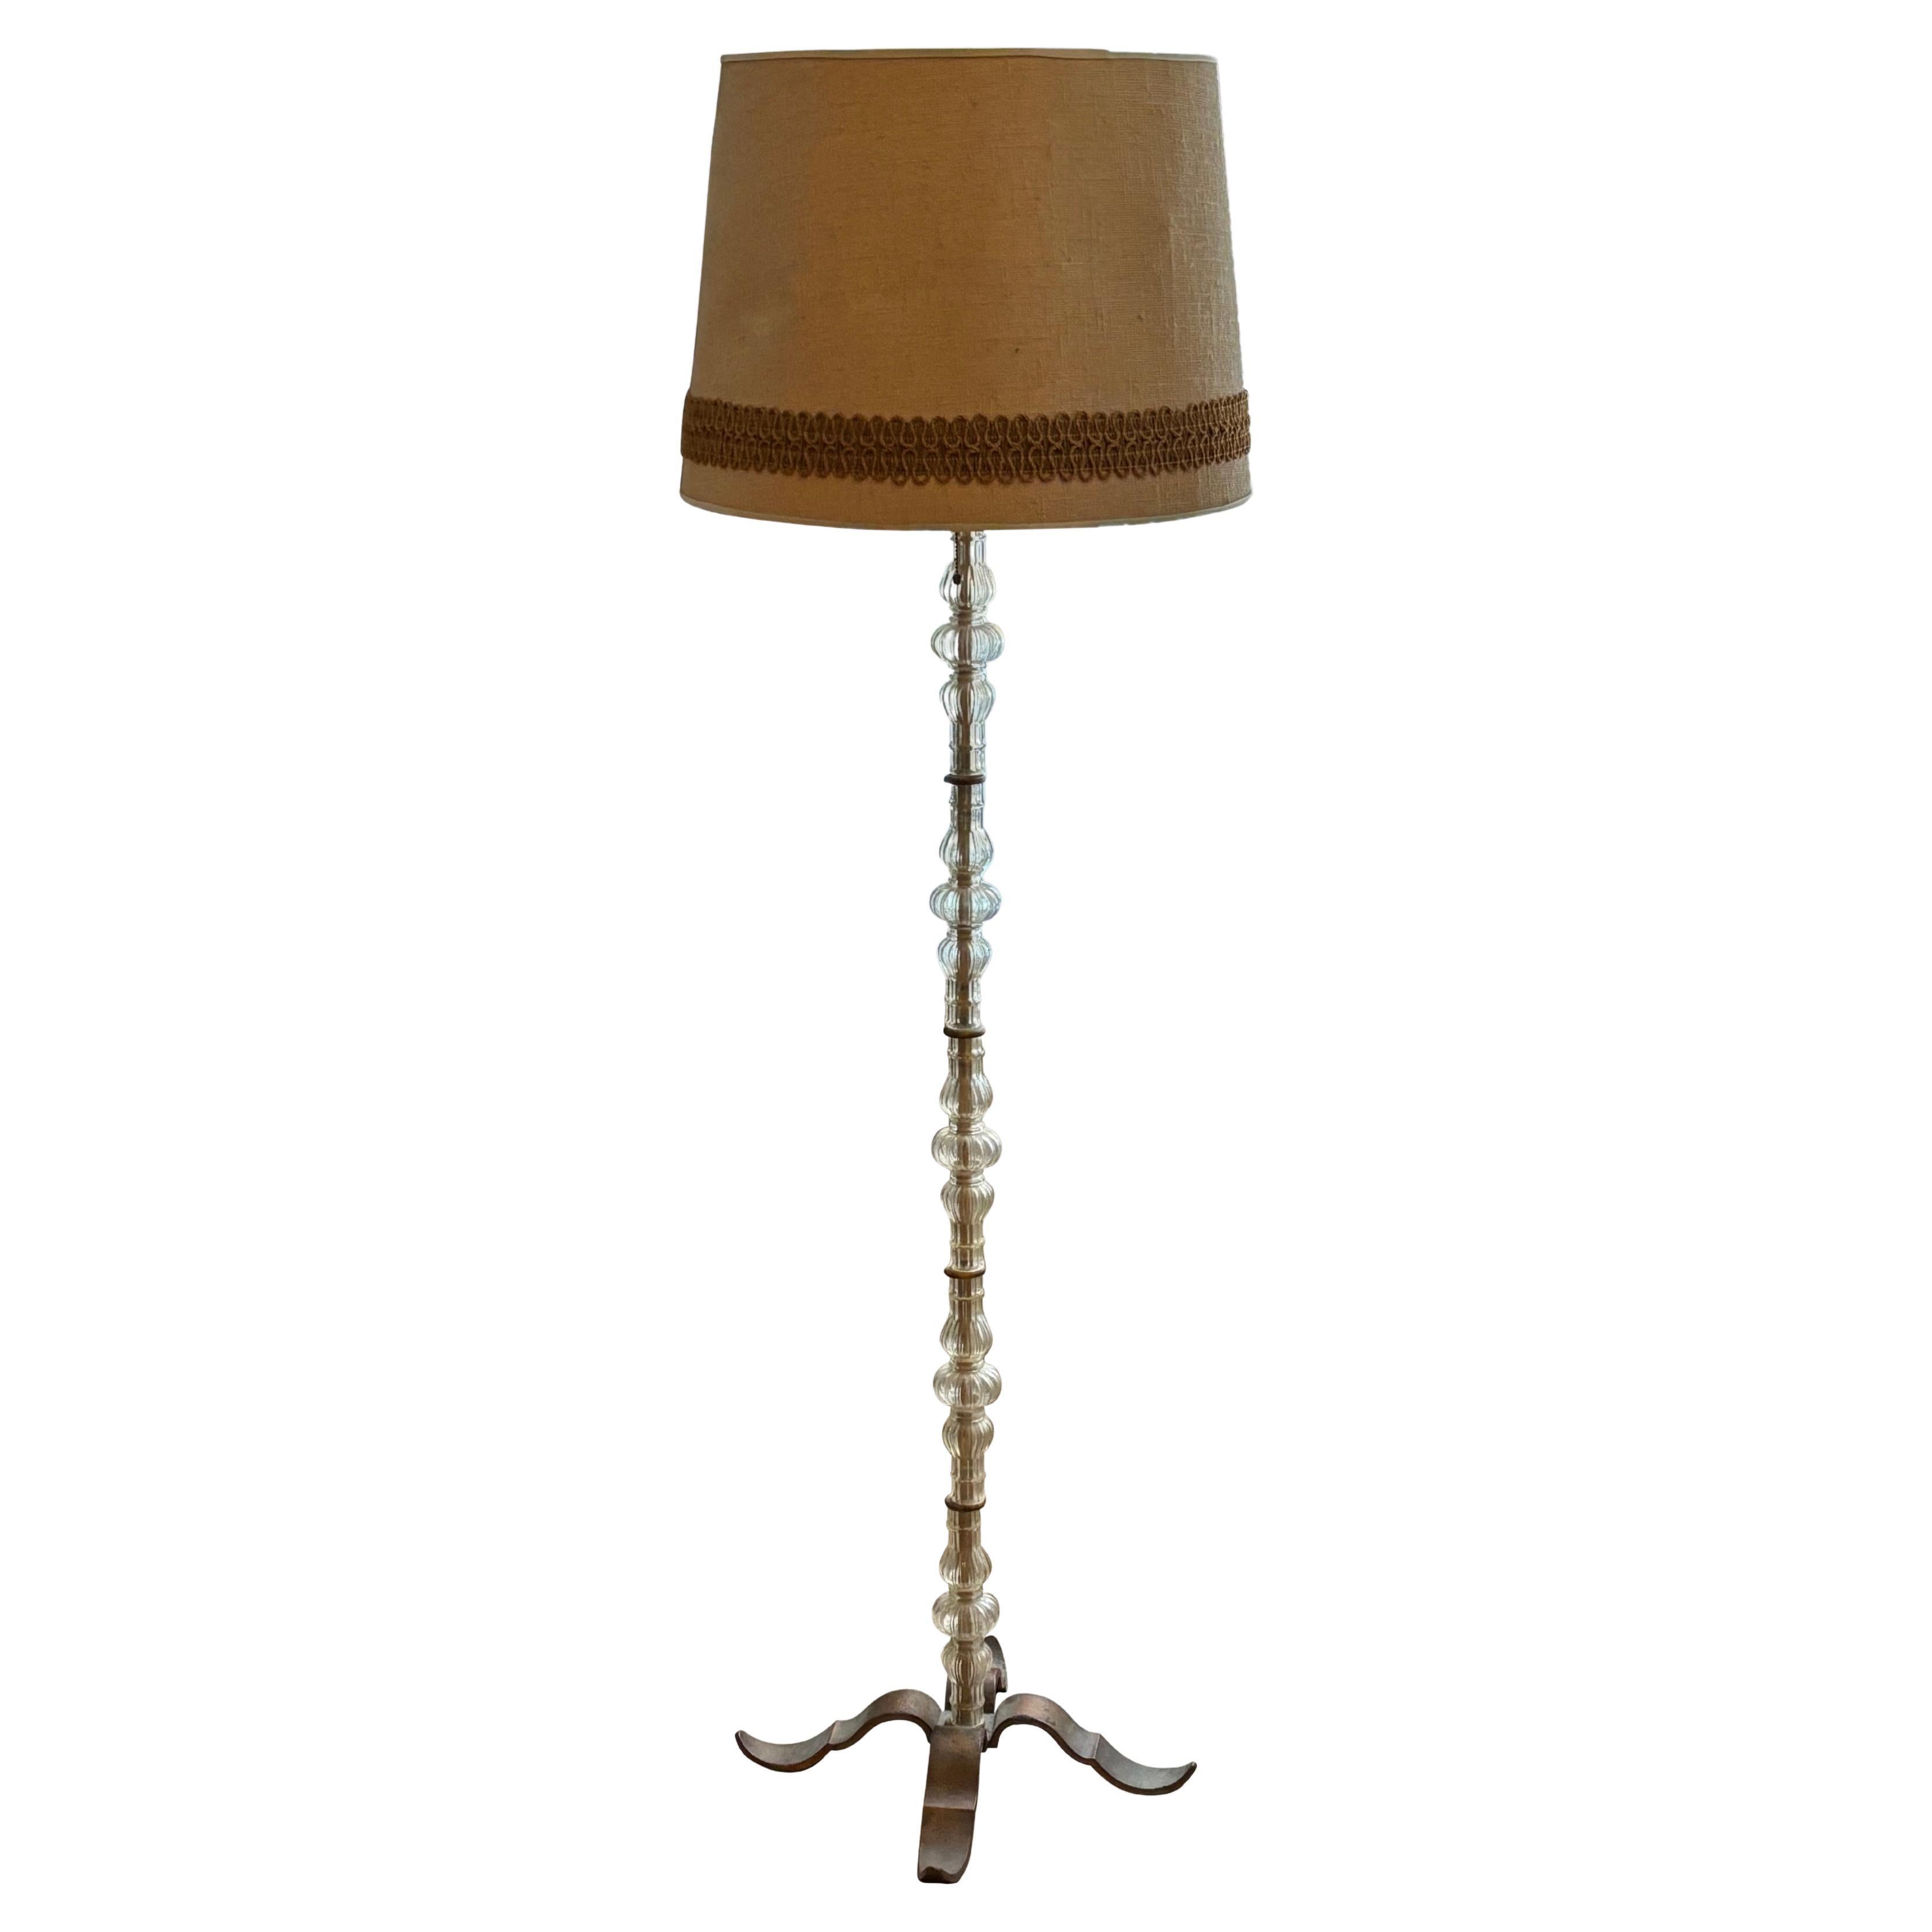 1960s French Glass & Brass Floor Lamp For Sale